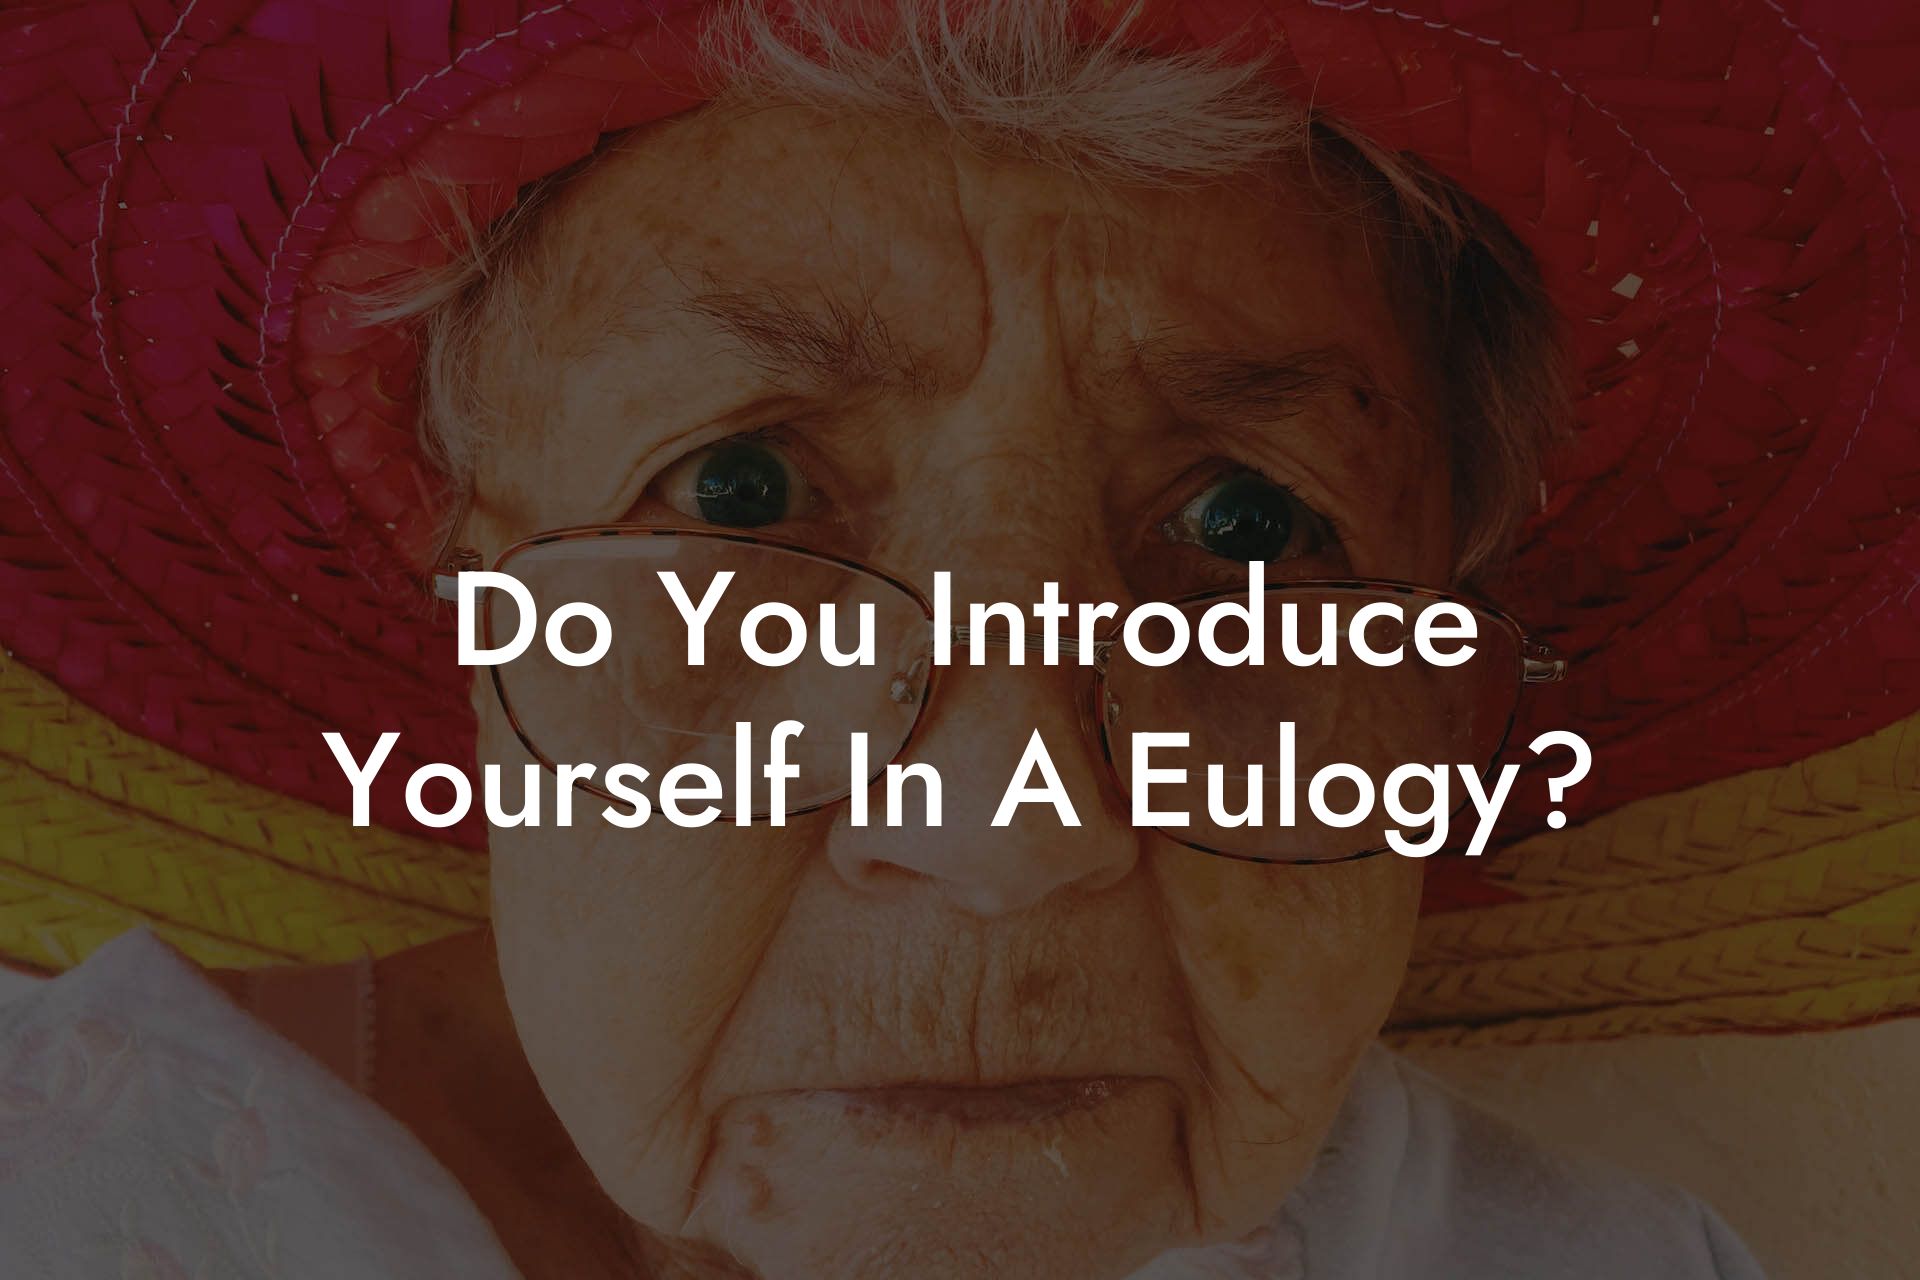 Do You Introduce Yourself In A Eulogy?